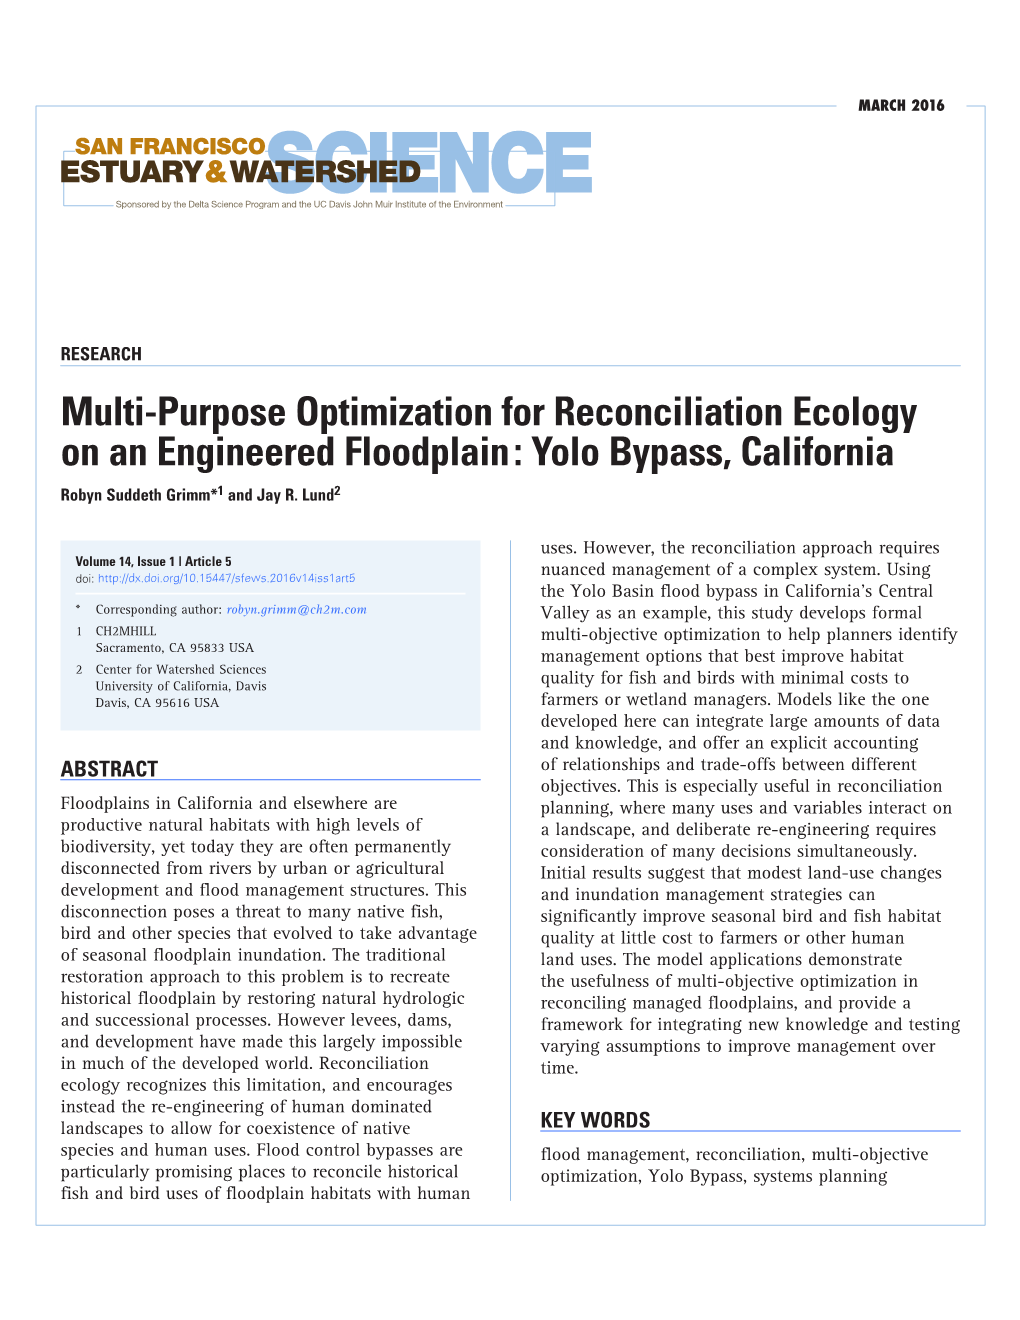 Multi-Purpose Optimization for Reconciliation Ecology on an Engineered Floodplain : Yolo Bypass, California Robyn Suddeth Grimm*1 and Jay R